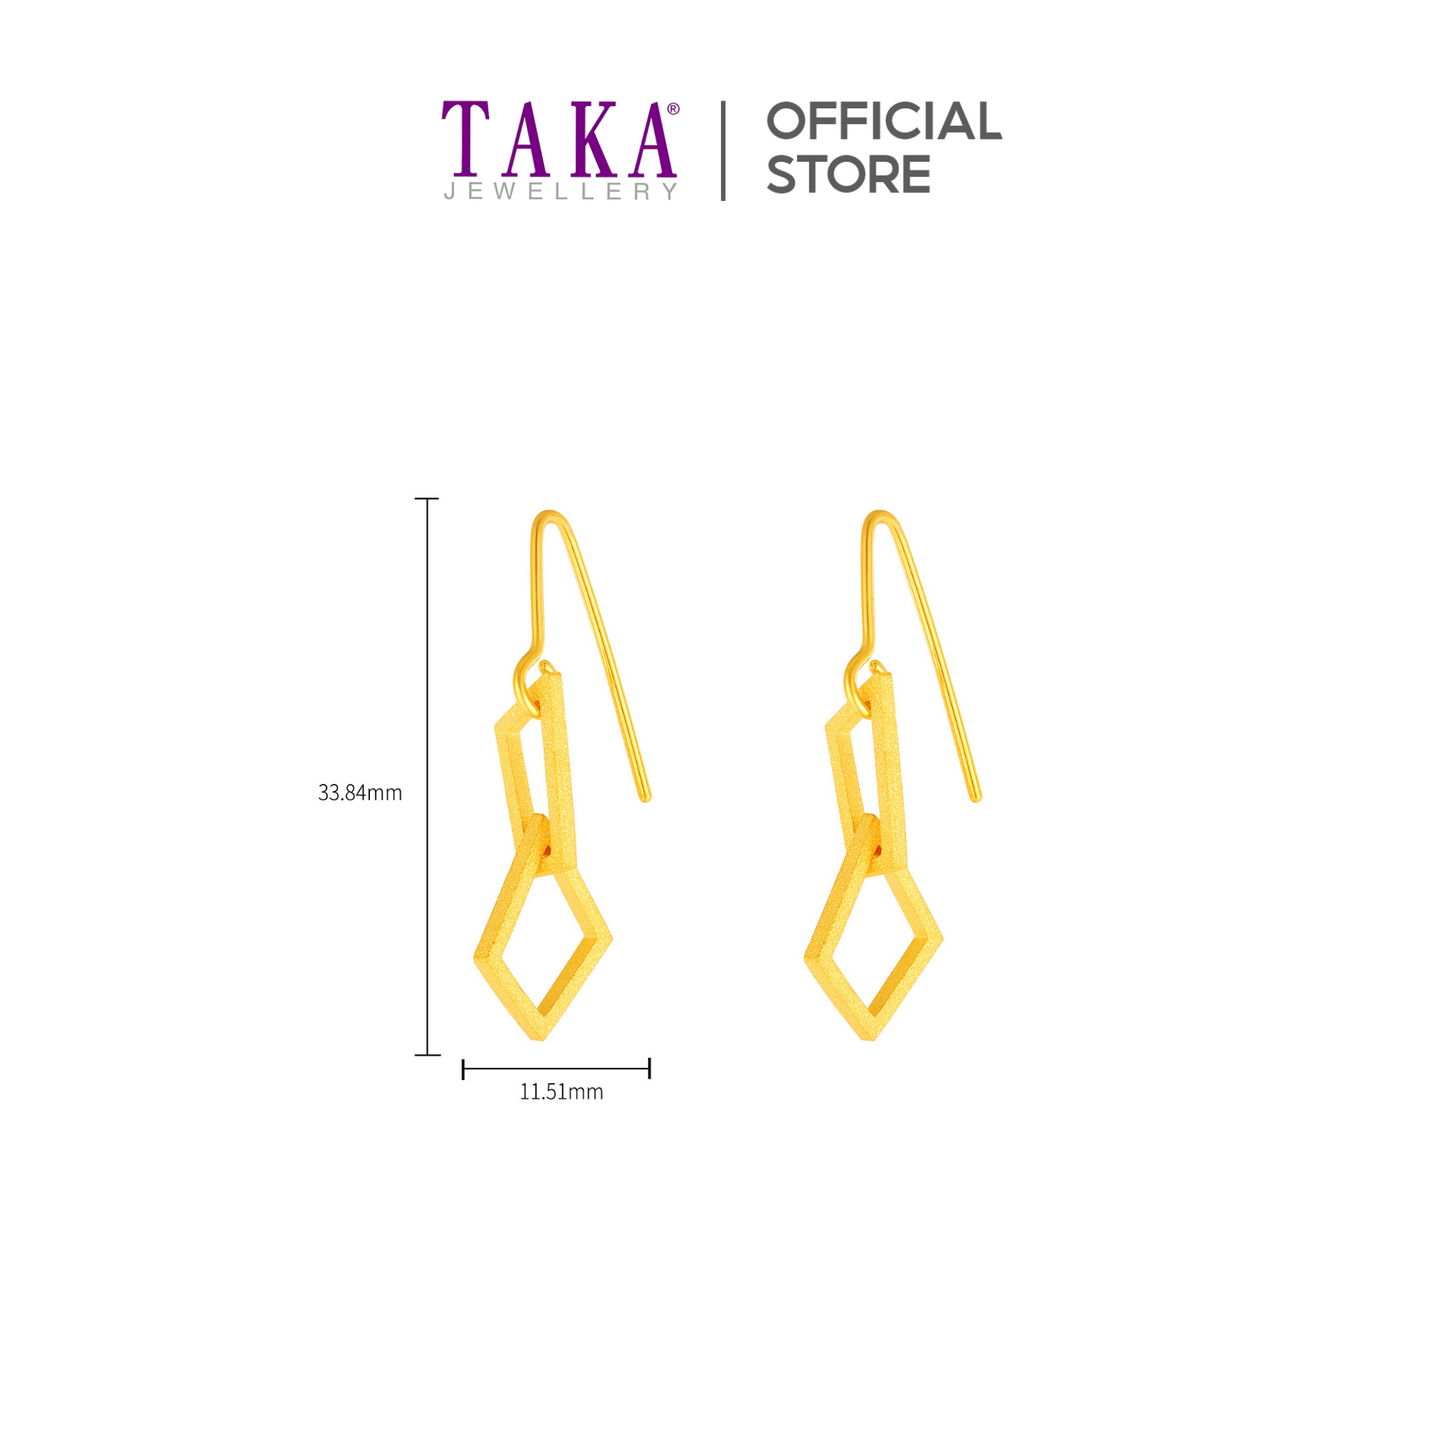 TAKA Jewellery 999 Pure Gold Matching Set - Necklace, Earrings and Bracelet